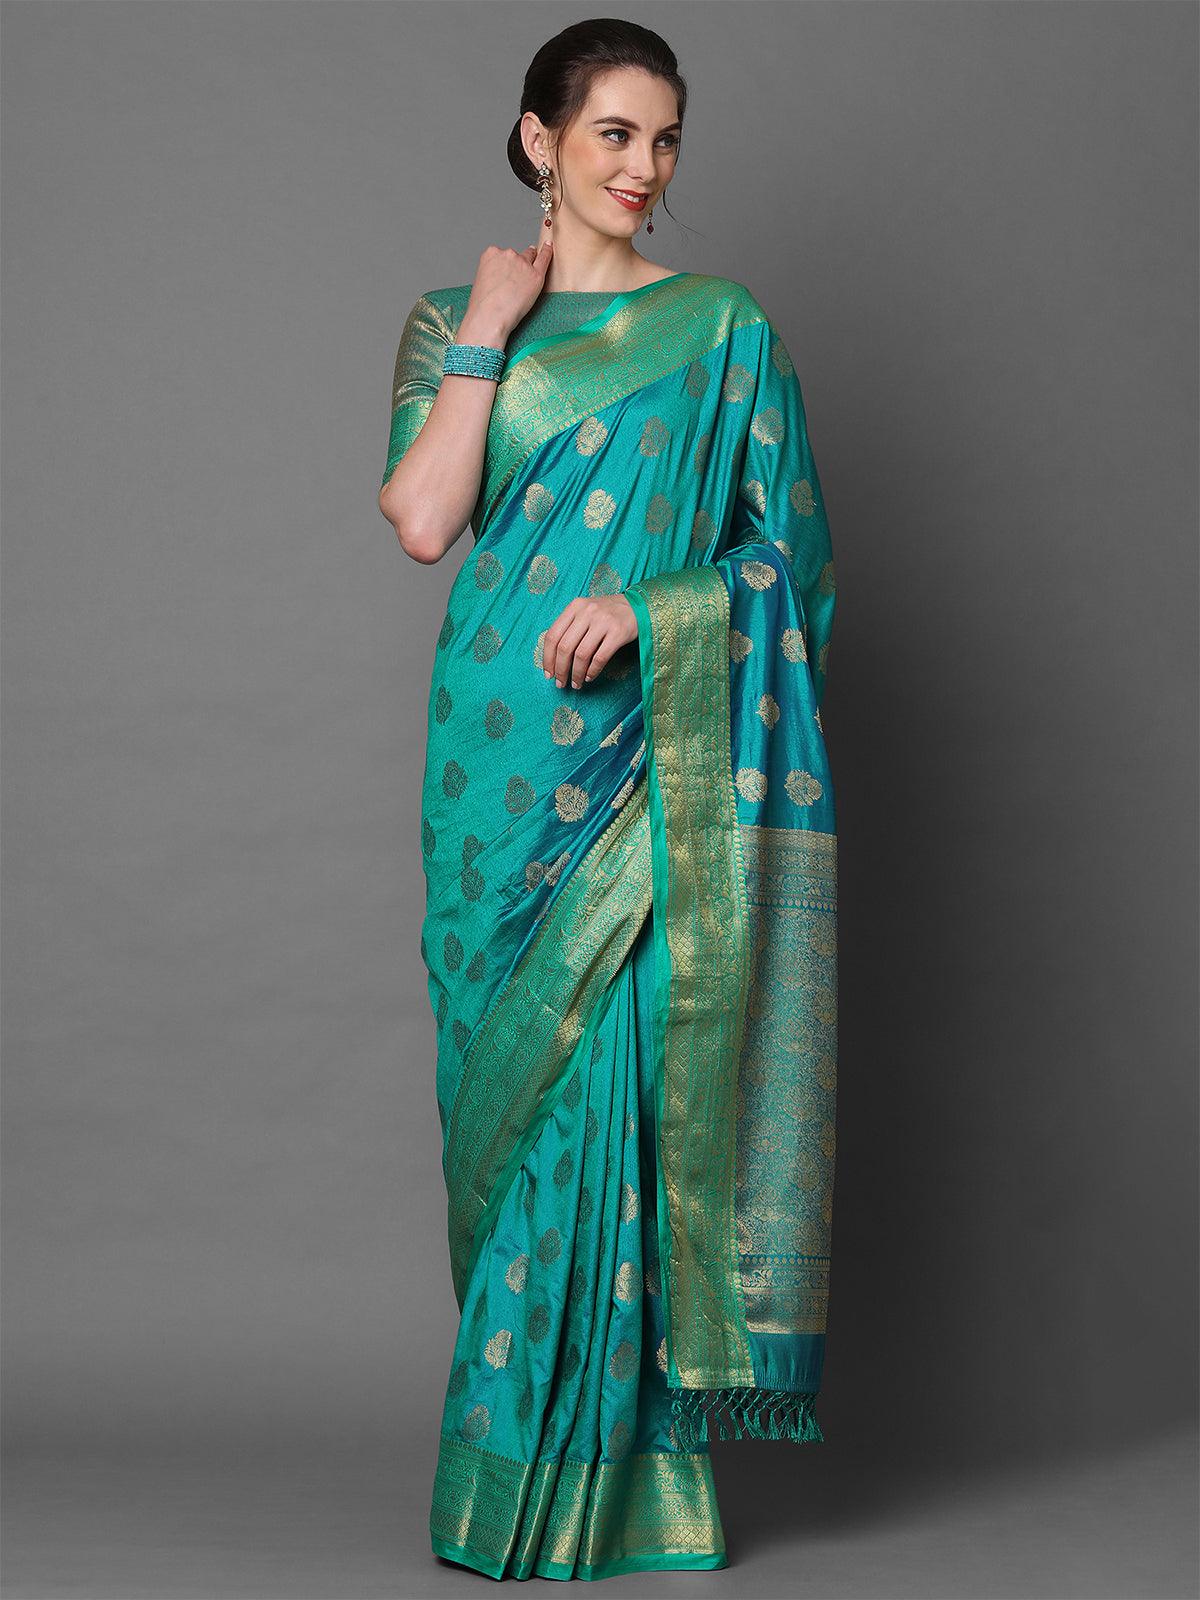 Teal Blue Party Wear Silk Blend Woven Design Saree With Unstitched Blouse - Odette